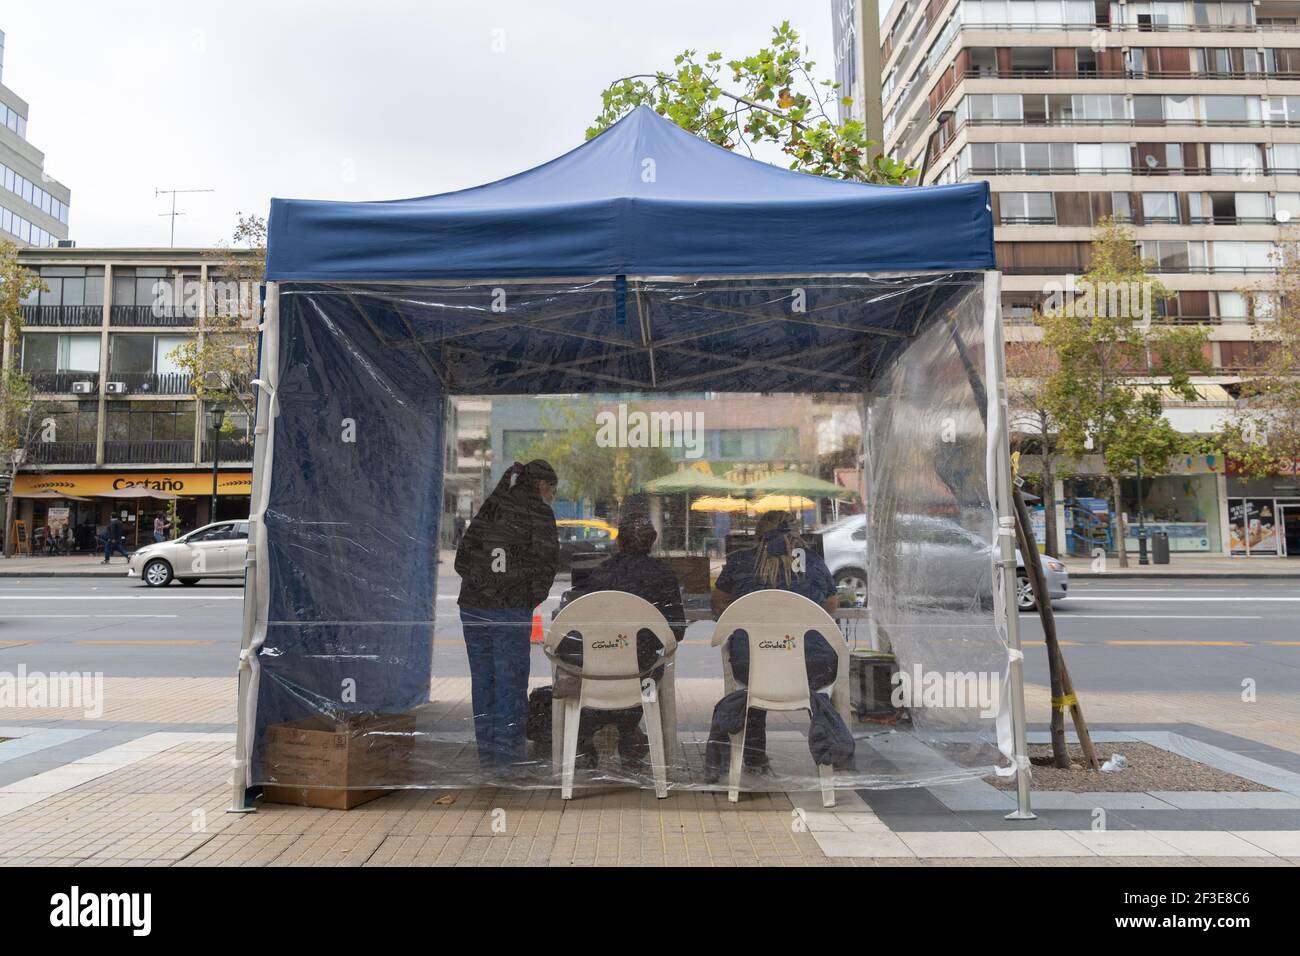 March 16, 2021, Santiago, Metropolitana, Chile: A drive-thru vaccionation site against COVID 19 in Santiago, Chile. So far, almost 5 million people have been vaccinated in the country, and 41% of them with the second dose. (Credit Image: © Matias Basualdo/ZUMA Wire) Stock Photo